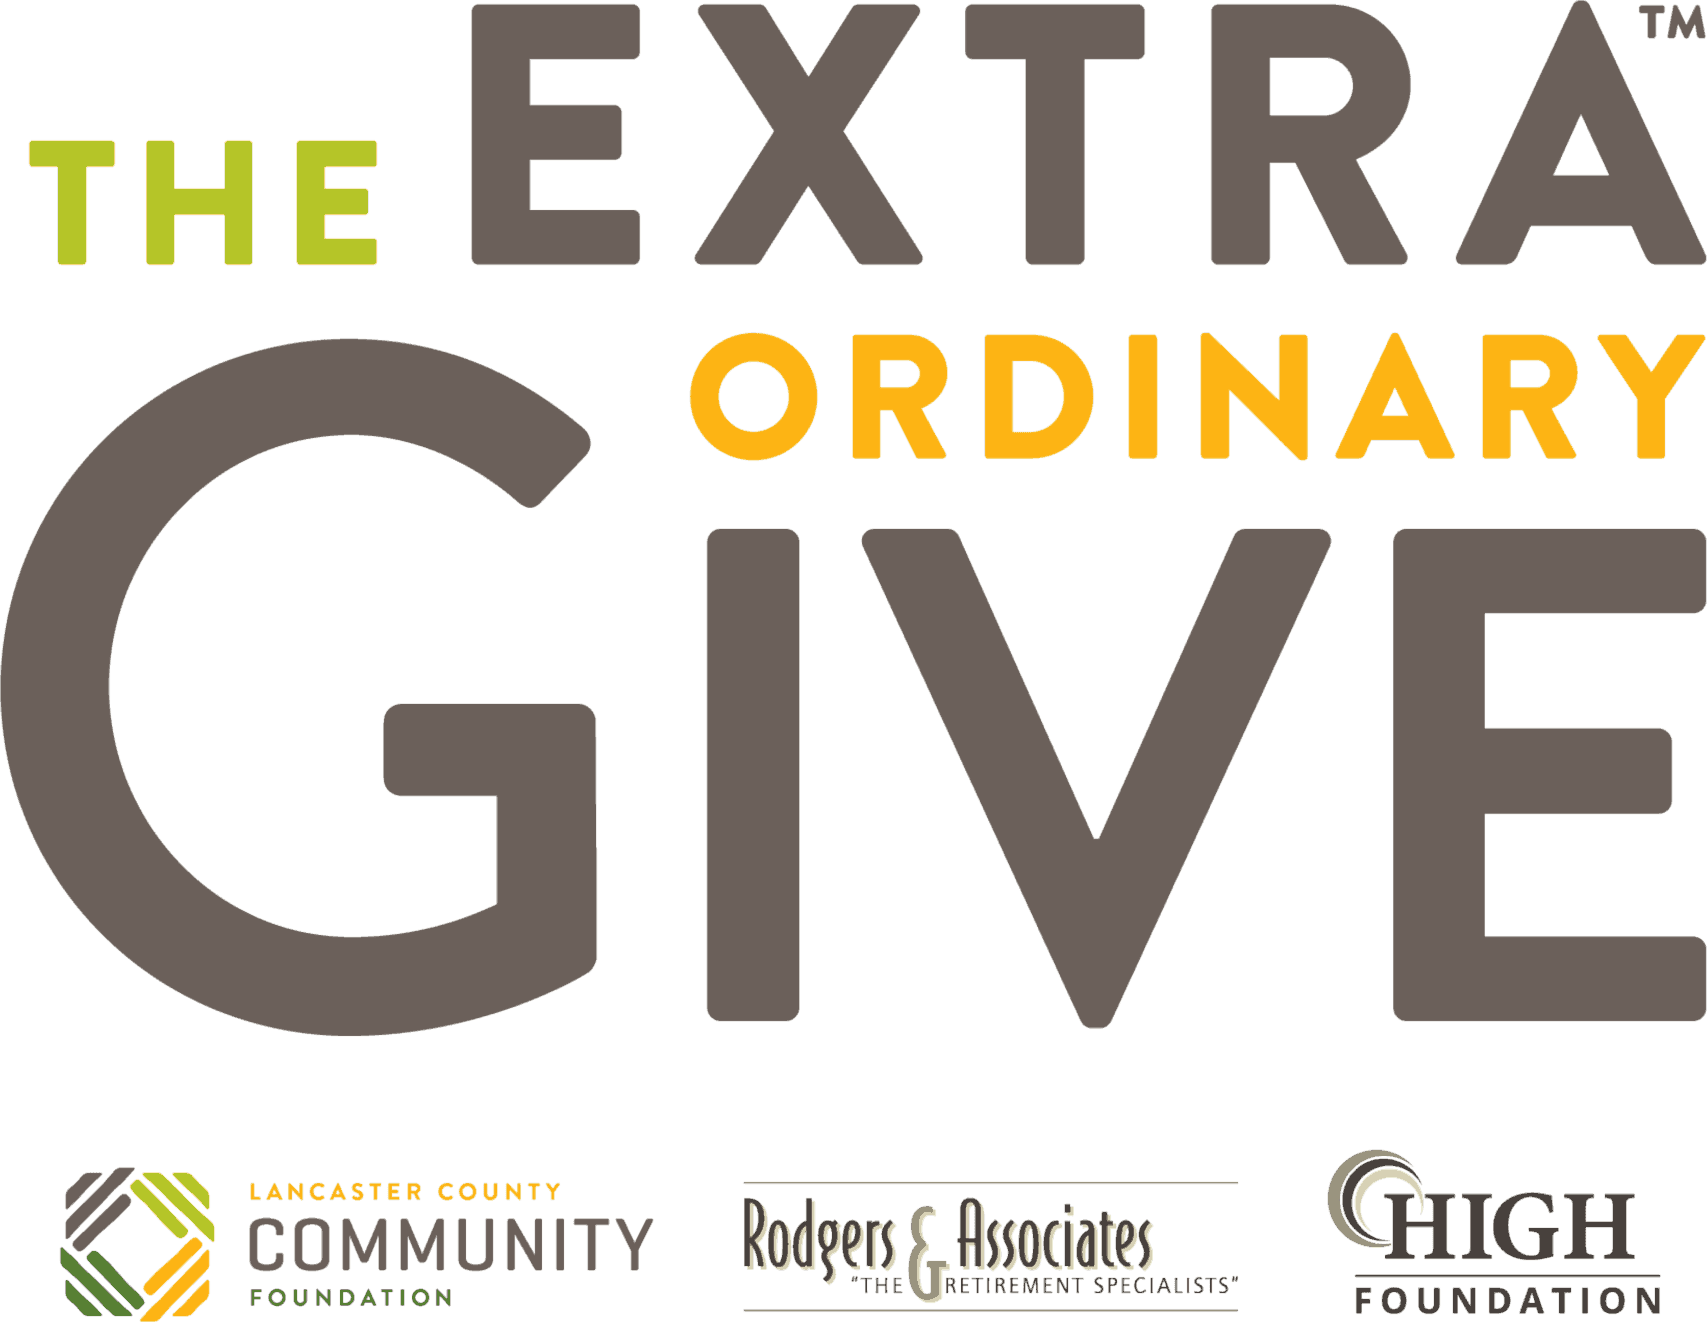 The Extraordinary Give